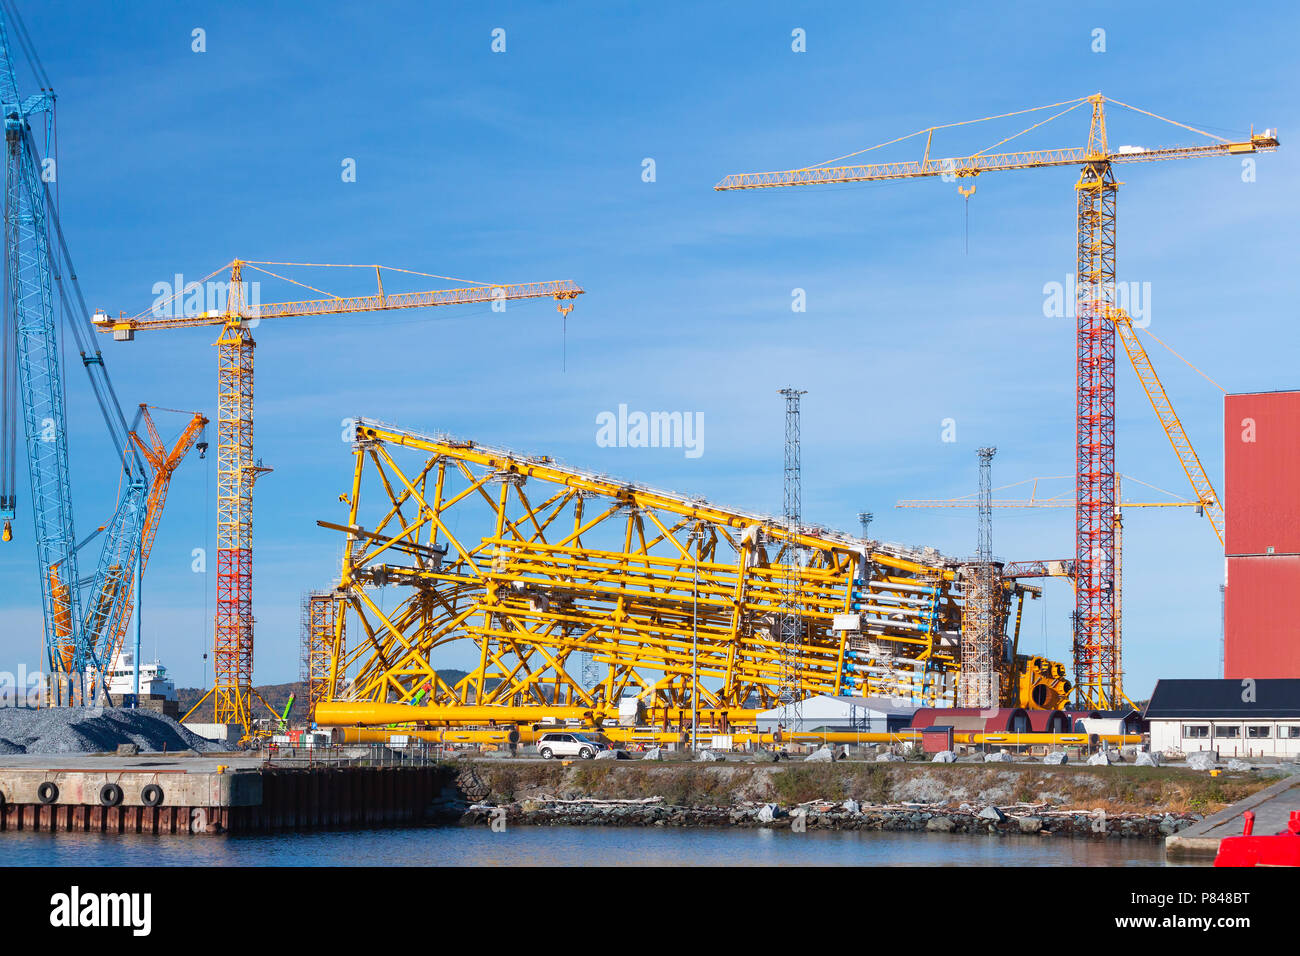 Oil production platform is under construction. Industrial landscape with cranes. Verdal, Norway Stock Photo